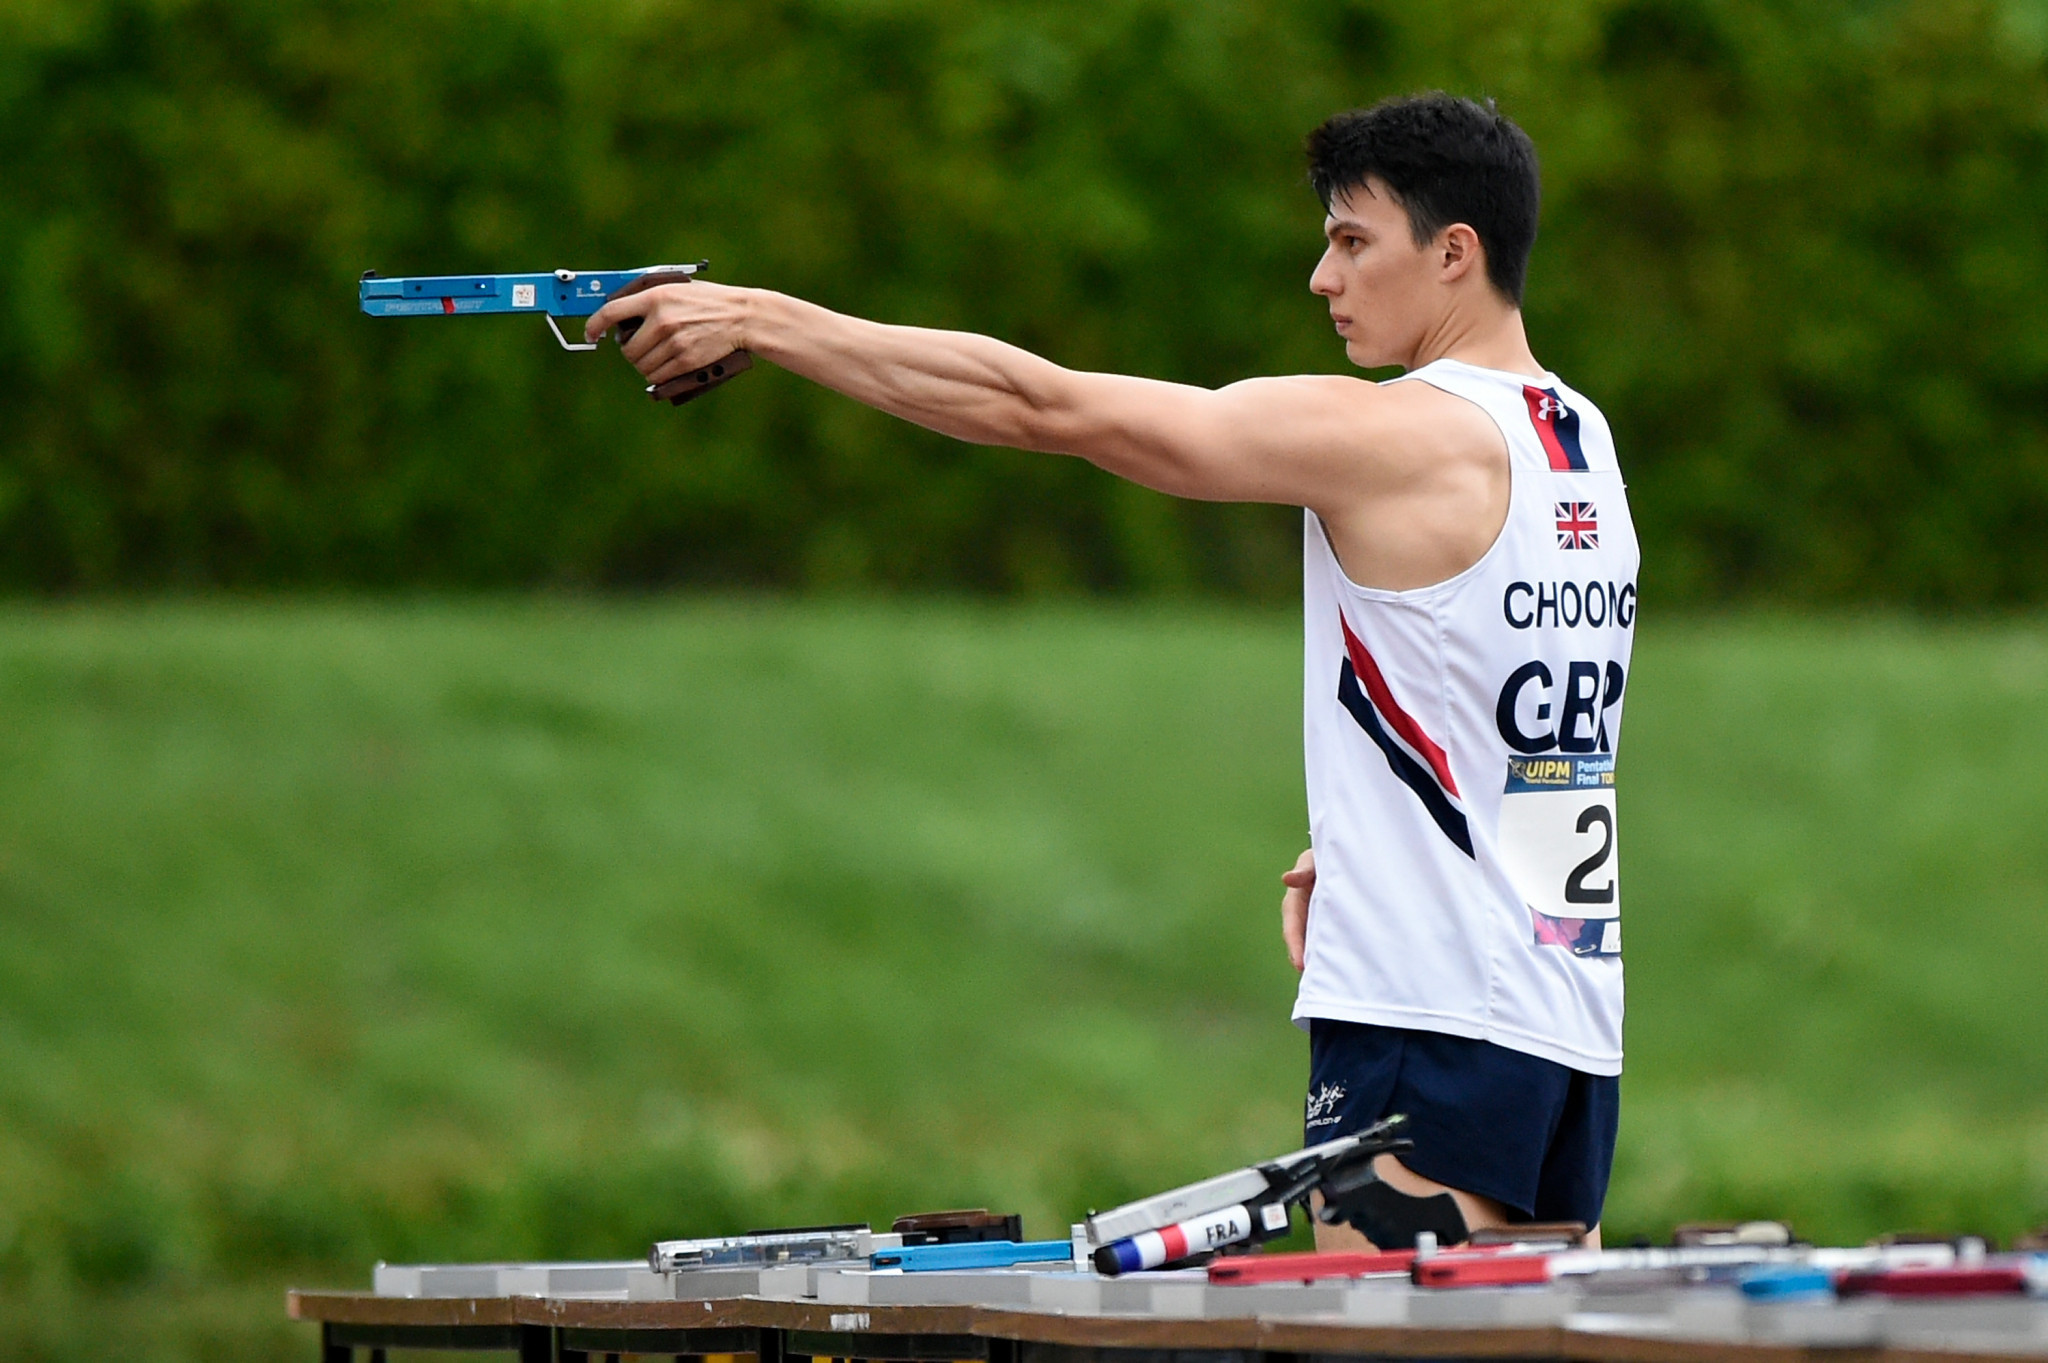 Britain's Joseph Choong was victorious when the UIPM World Cup Final was held in Tokyo in 2019  ©Getty Images